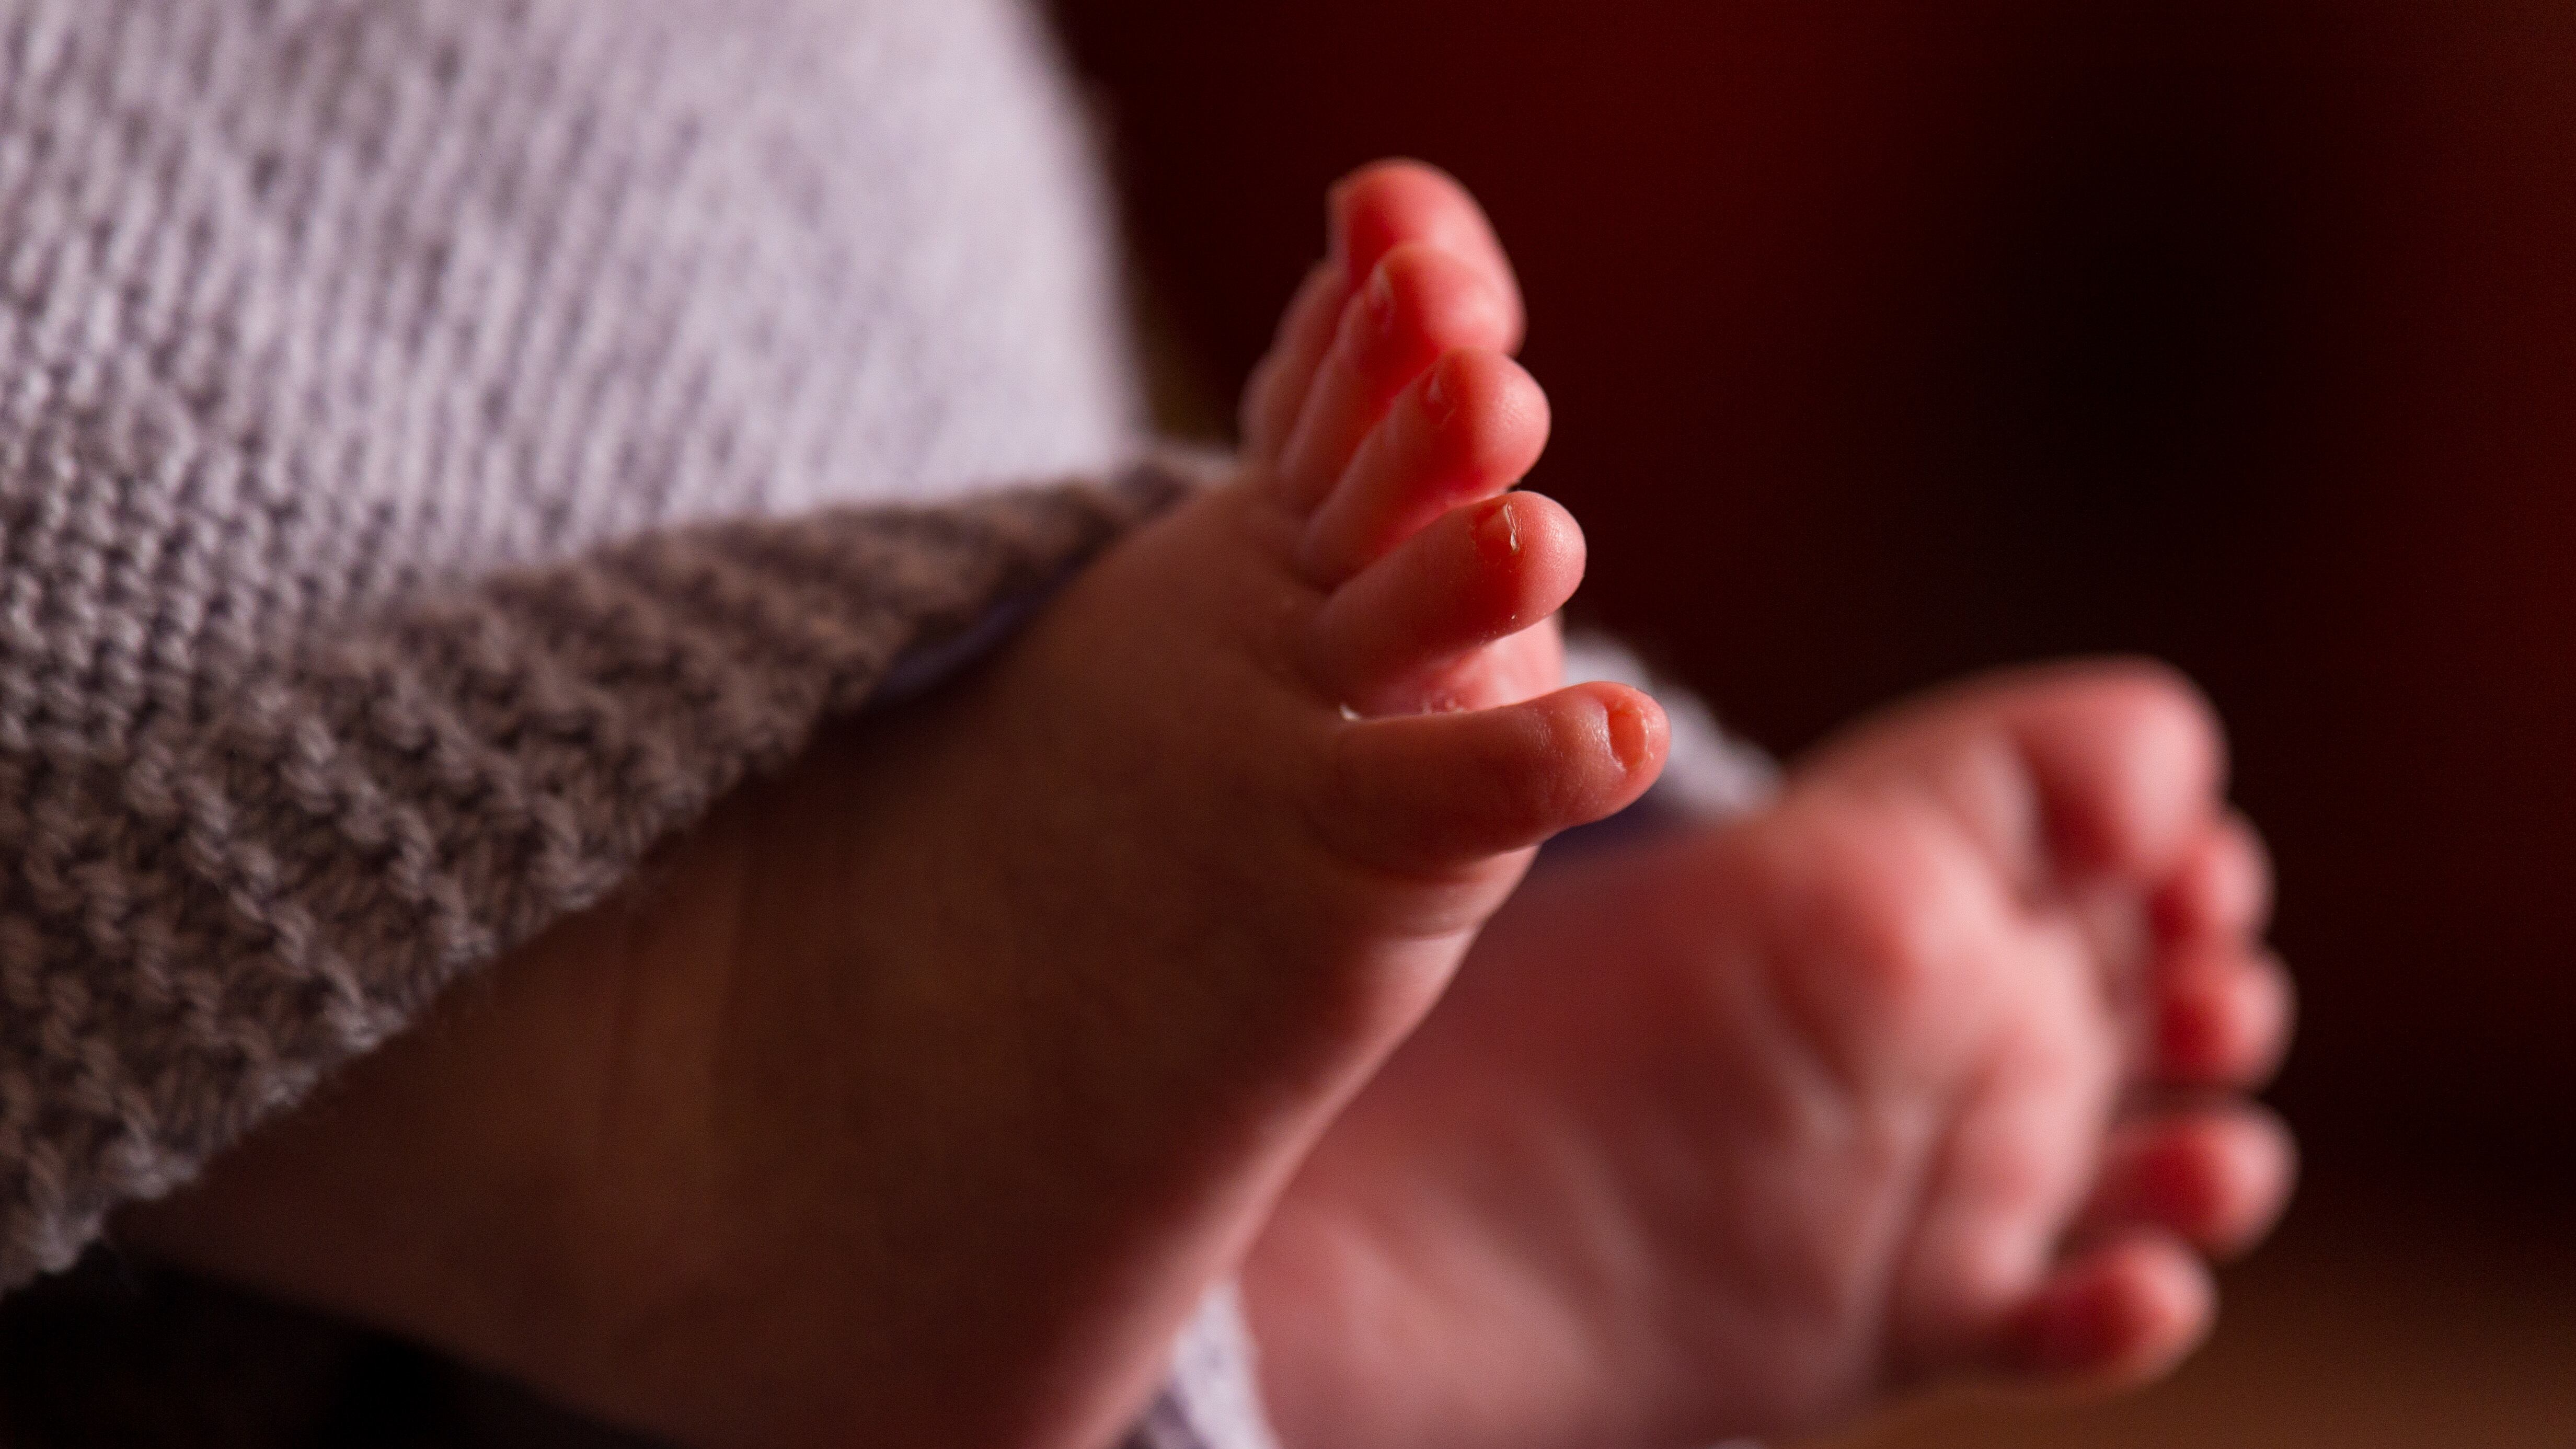 The difference in the mortality rate of babies living in the most deprived parts of England and those in the wealthiest areas is wider than at any point in the past 12 years, according to new figures